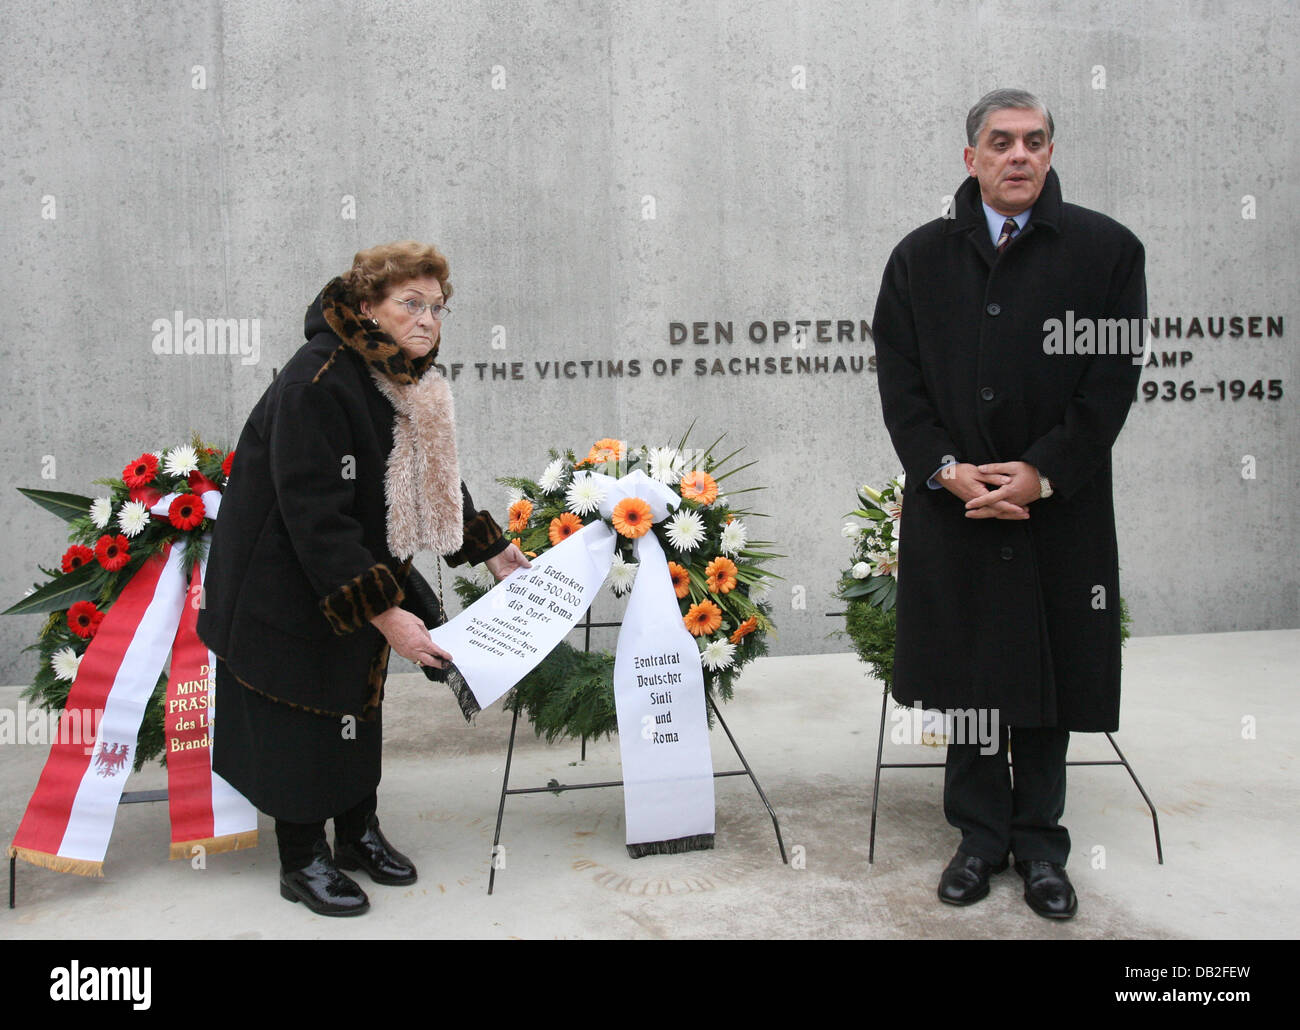 The Chairman of the Central Consistory of German Roma and Sinti Romani Rose (R) and Auschwitz survivor Luise Baecker (L) lay a wreath at the Sachsenhausen concentration camp memorial in Sachsenhausen, Germany, 19 December 2007. The Central Consistory of German Roma and Sinti commemorated the victims of the National Socialist Roma and Sinti genocide. The deportation of 23,000 Europe Stock Photo